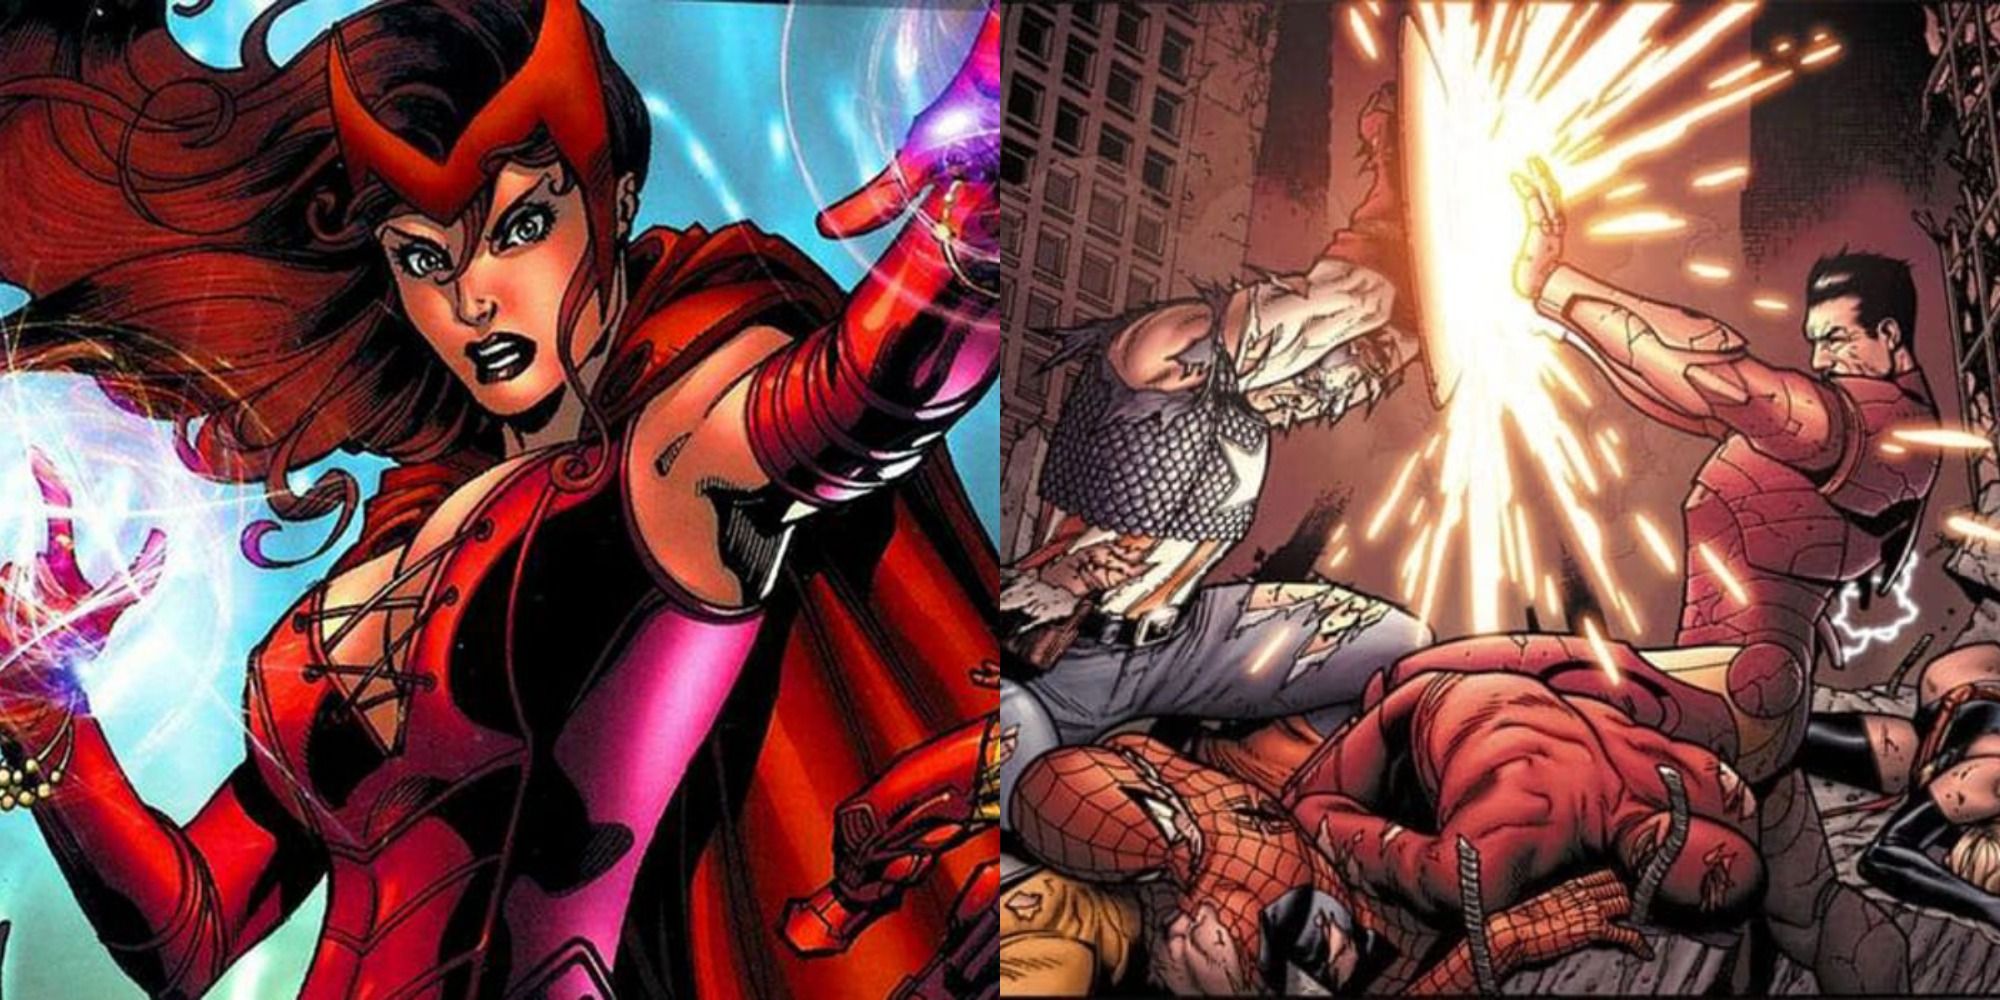 Split image of Scarlet Witch attacking the Avengers and Captain America fighting Iron Man in Civil War comic.